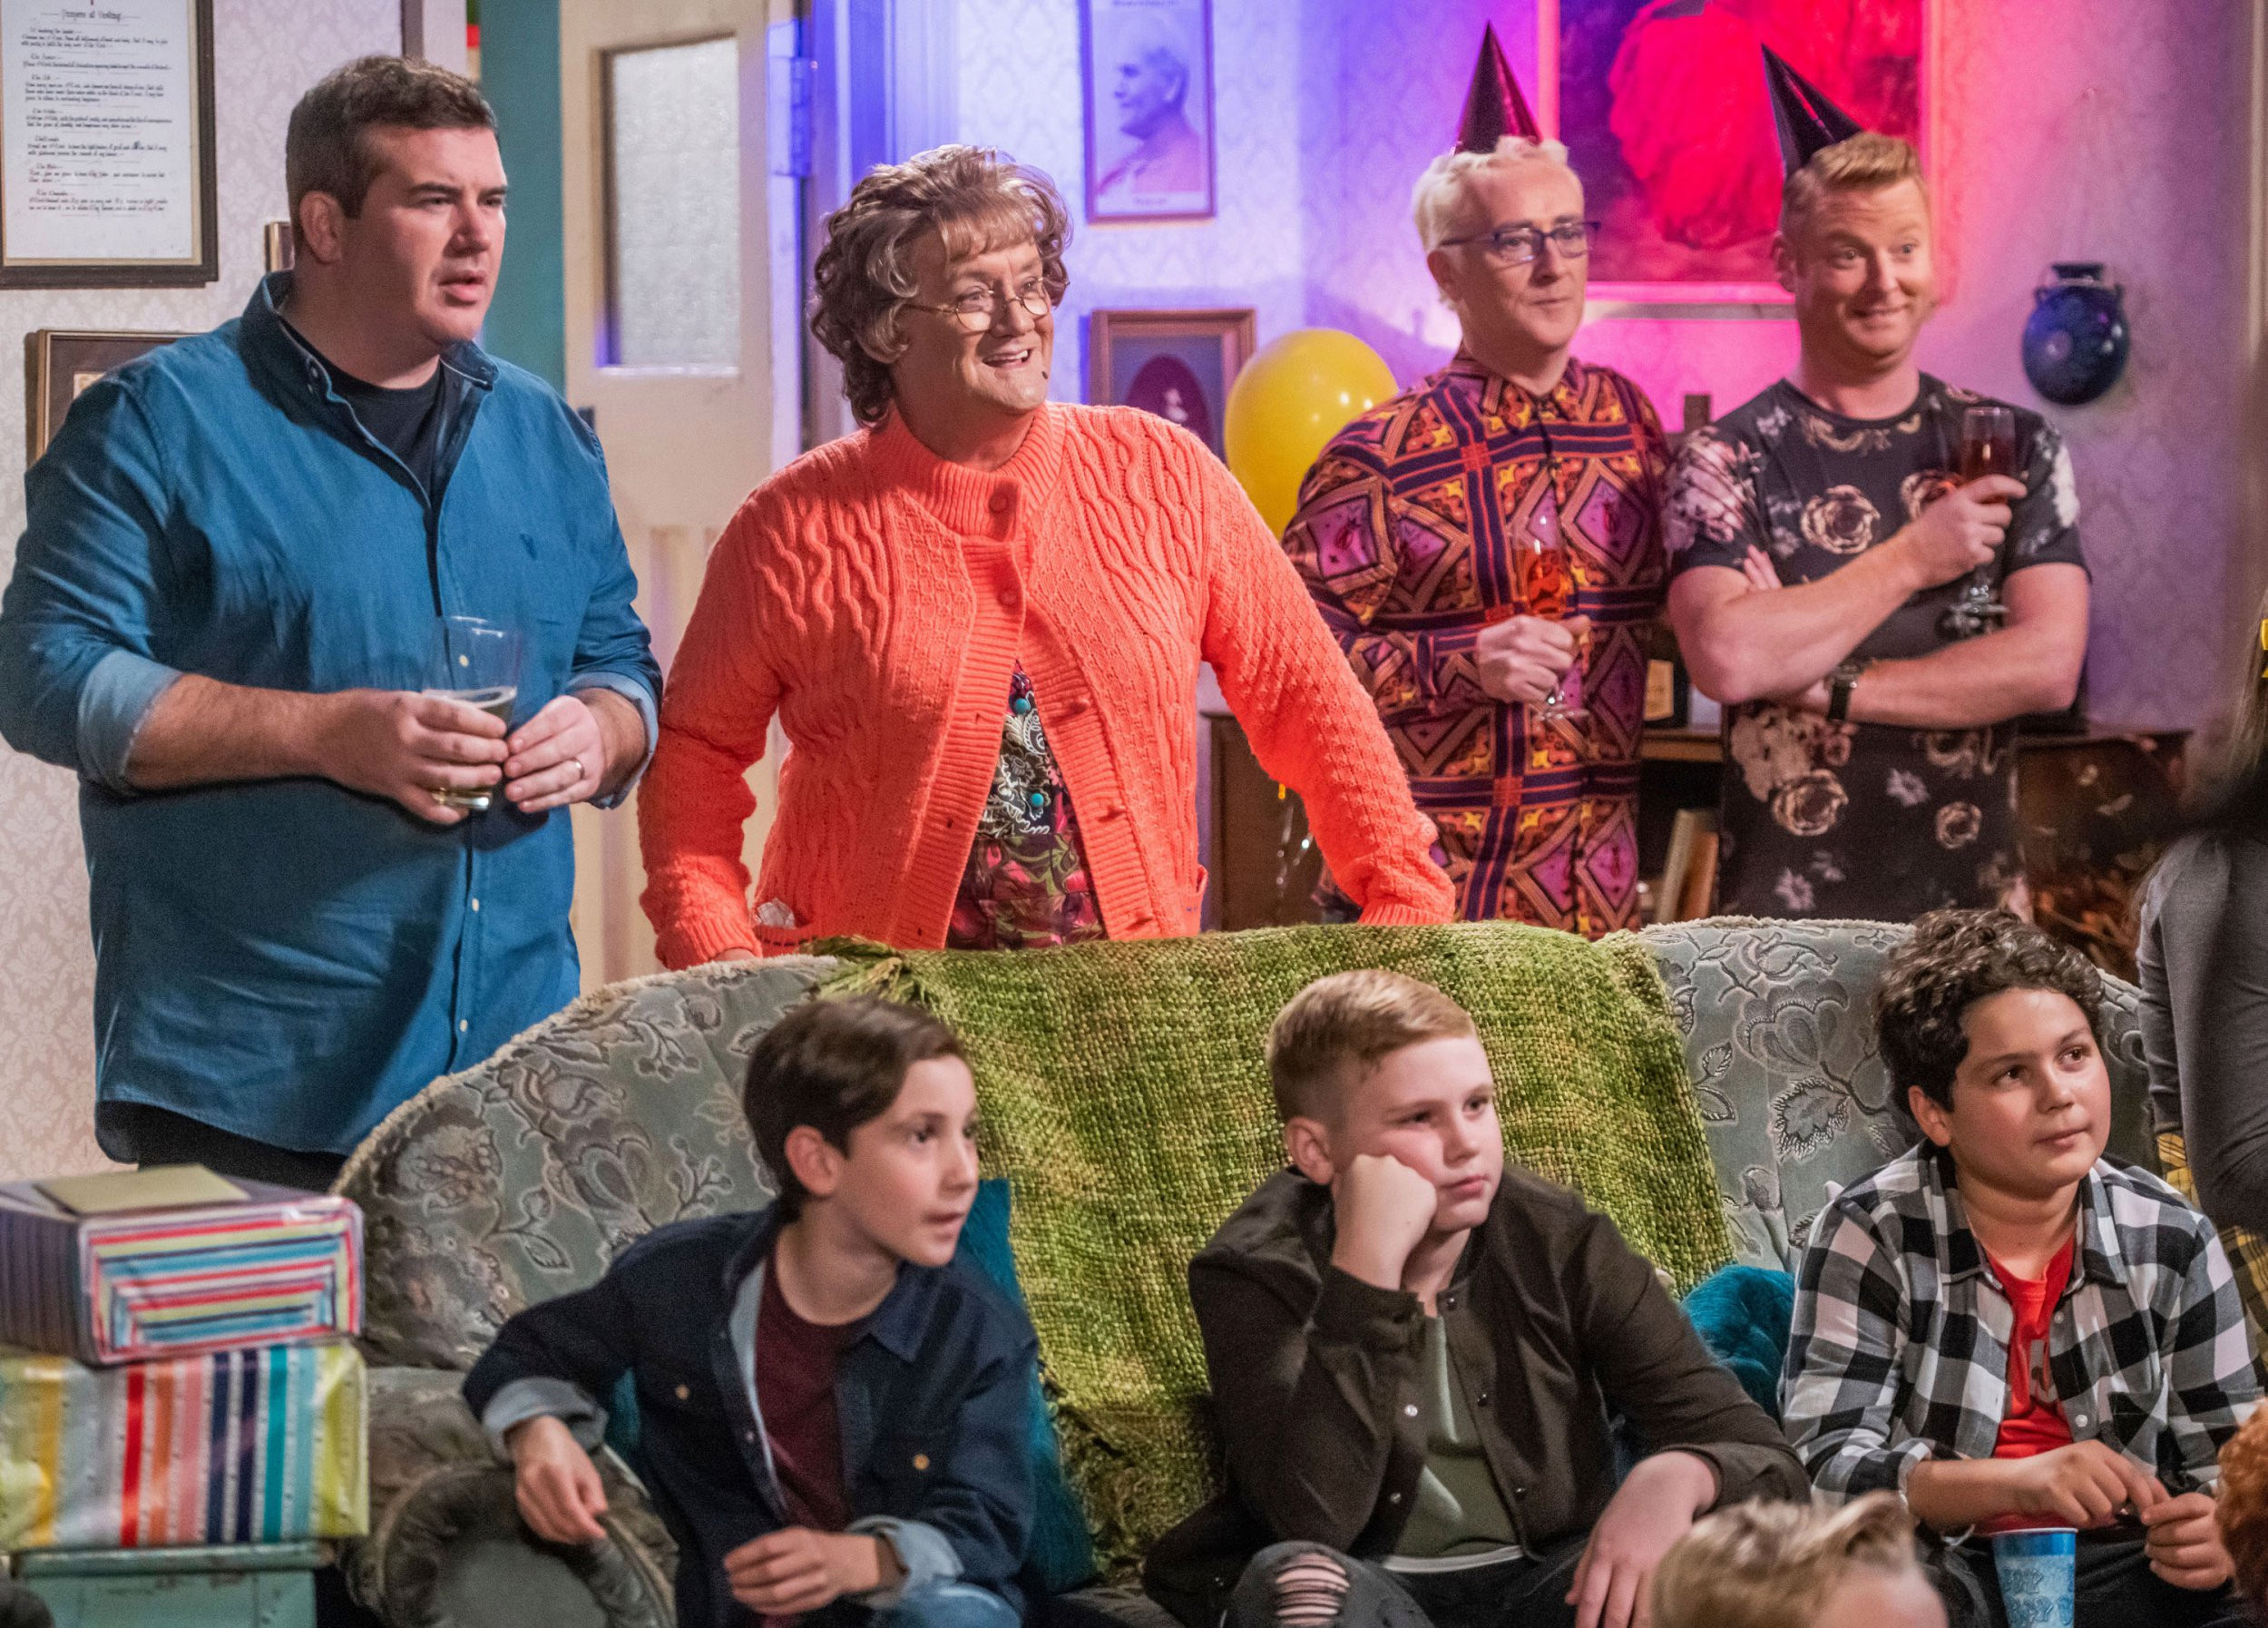 Gary Hollywood addresses his exit from Mrs Brown’s Boys ‘It’s been the